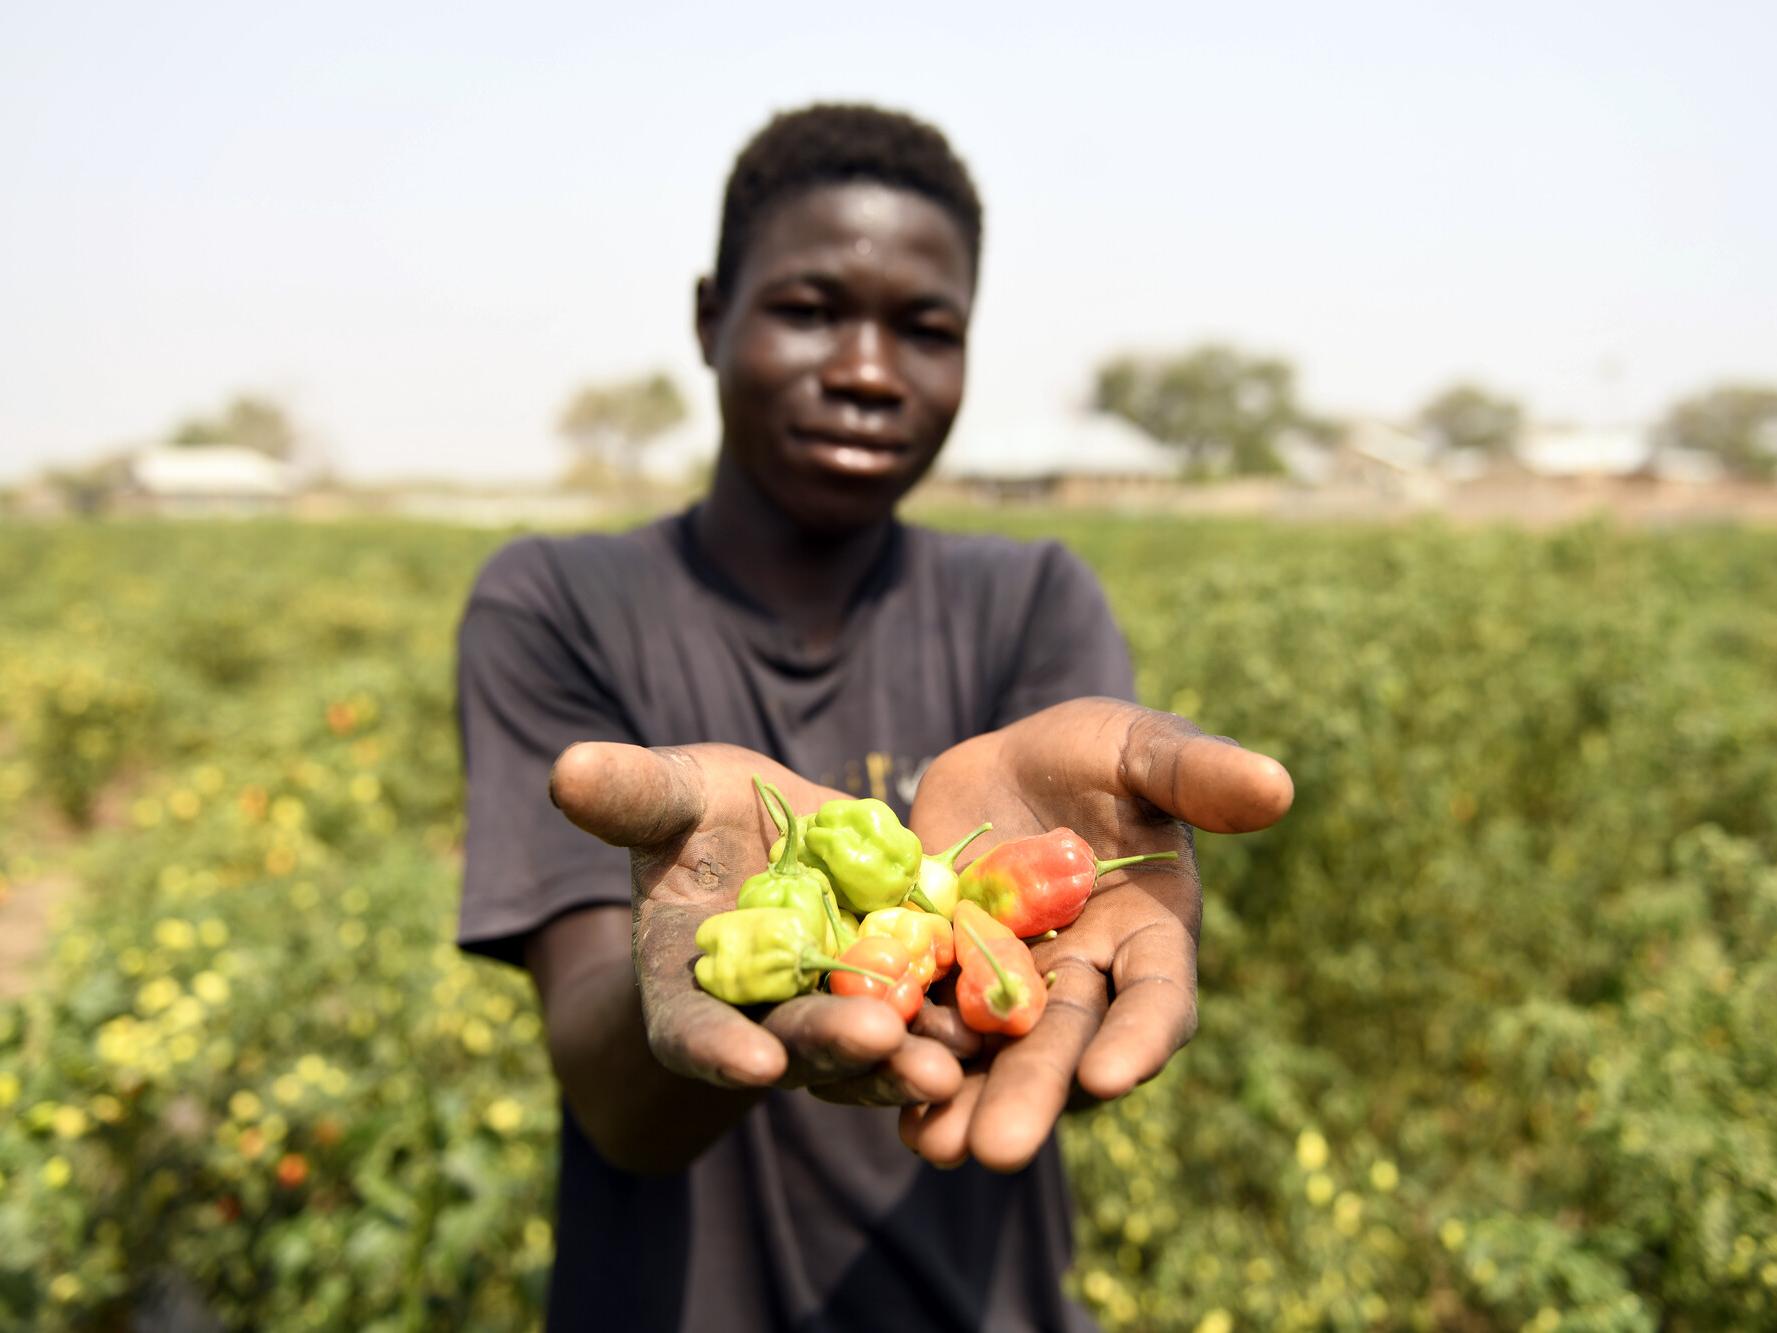 Kwame, 17, holding the peppers he has grown with support from Plan International in Ghana.